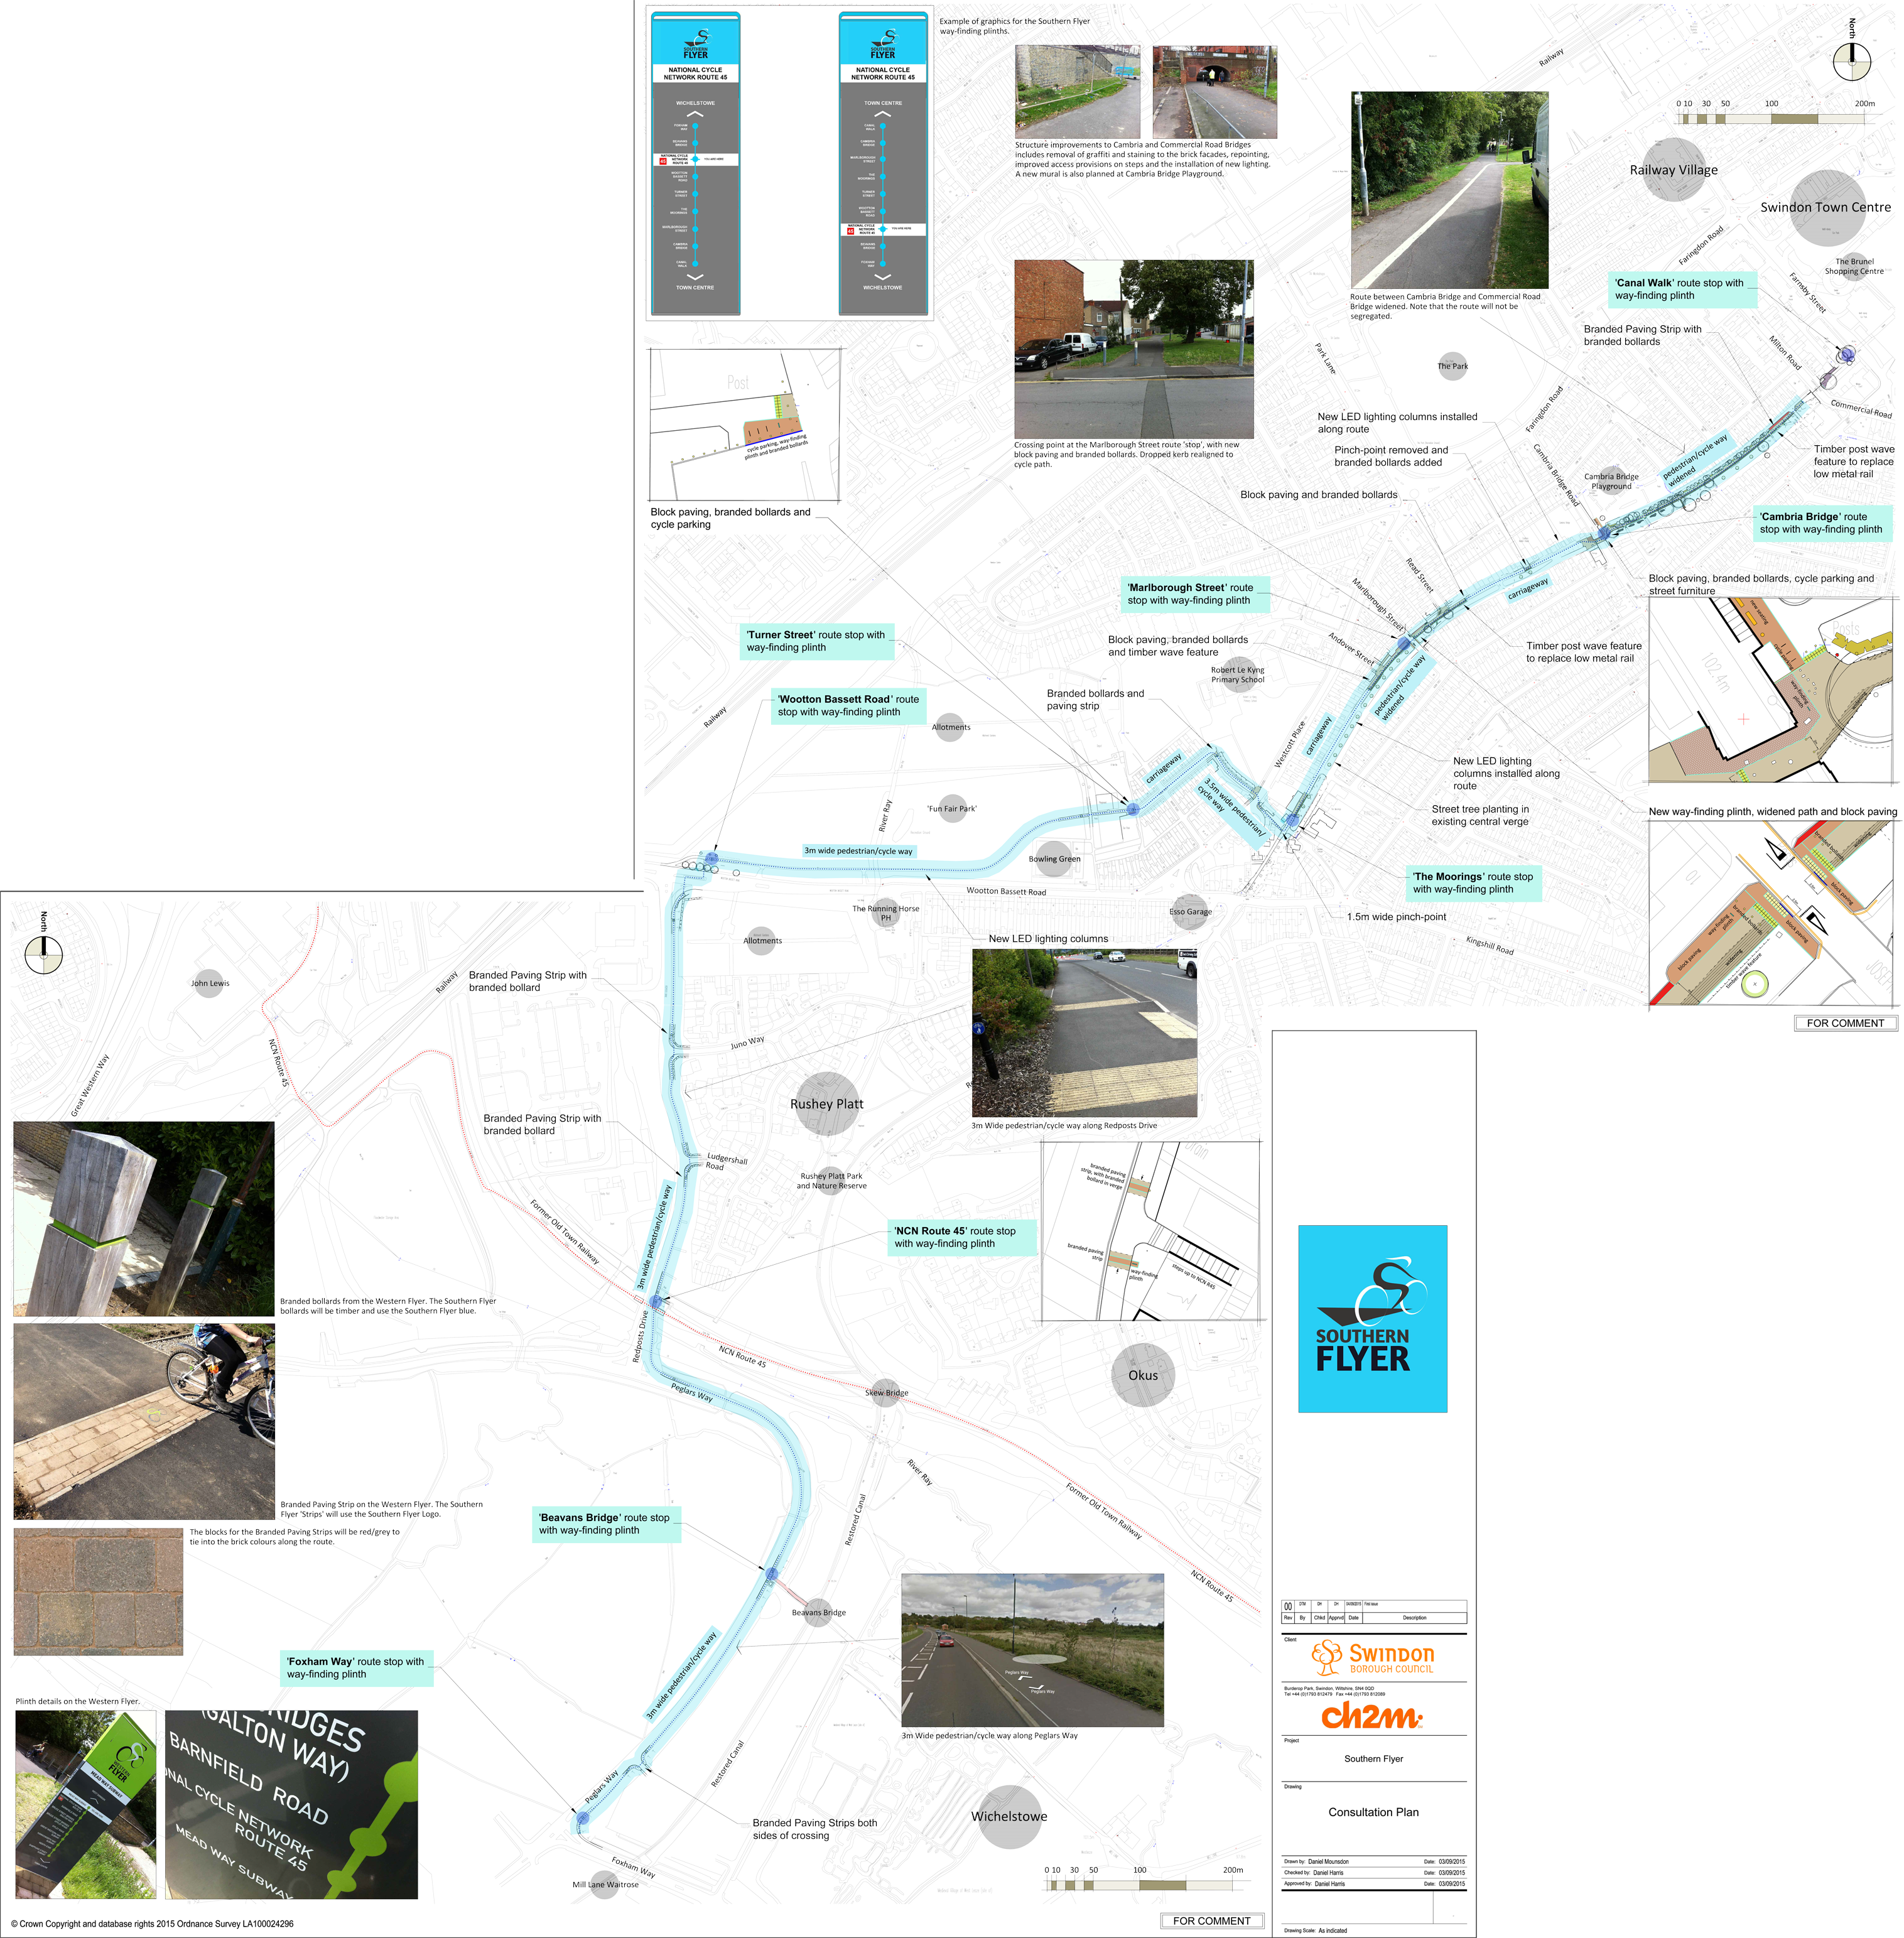 Southern Flyer cycle way plans